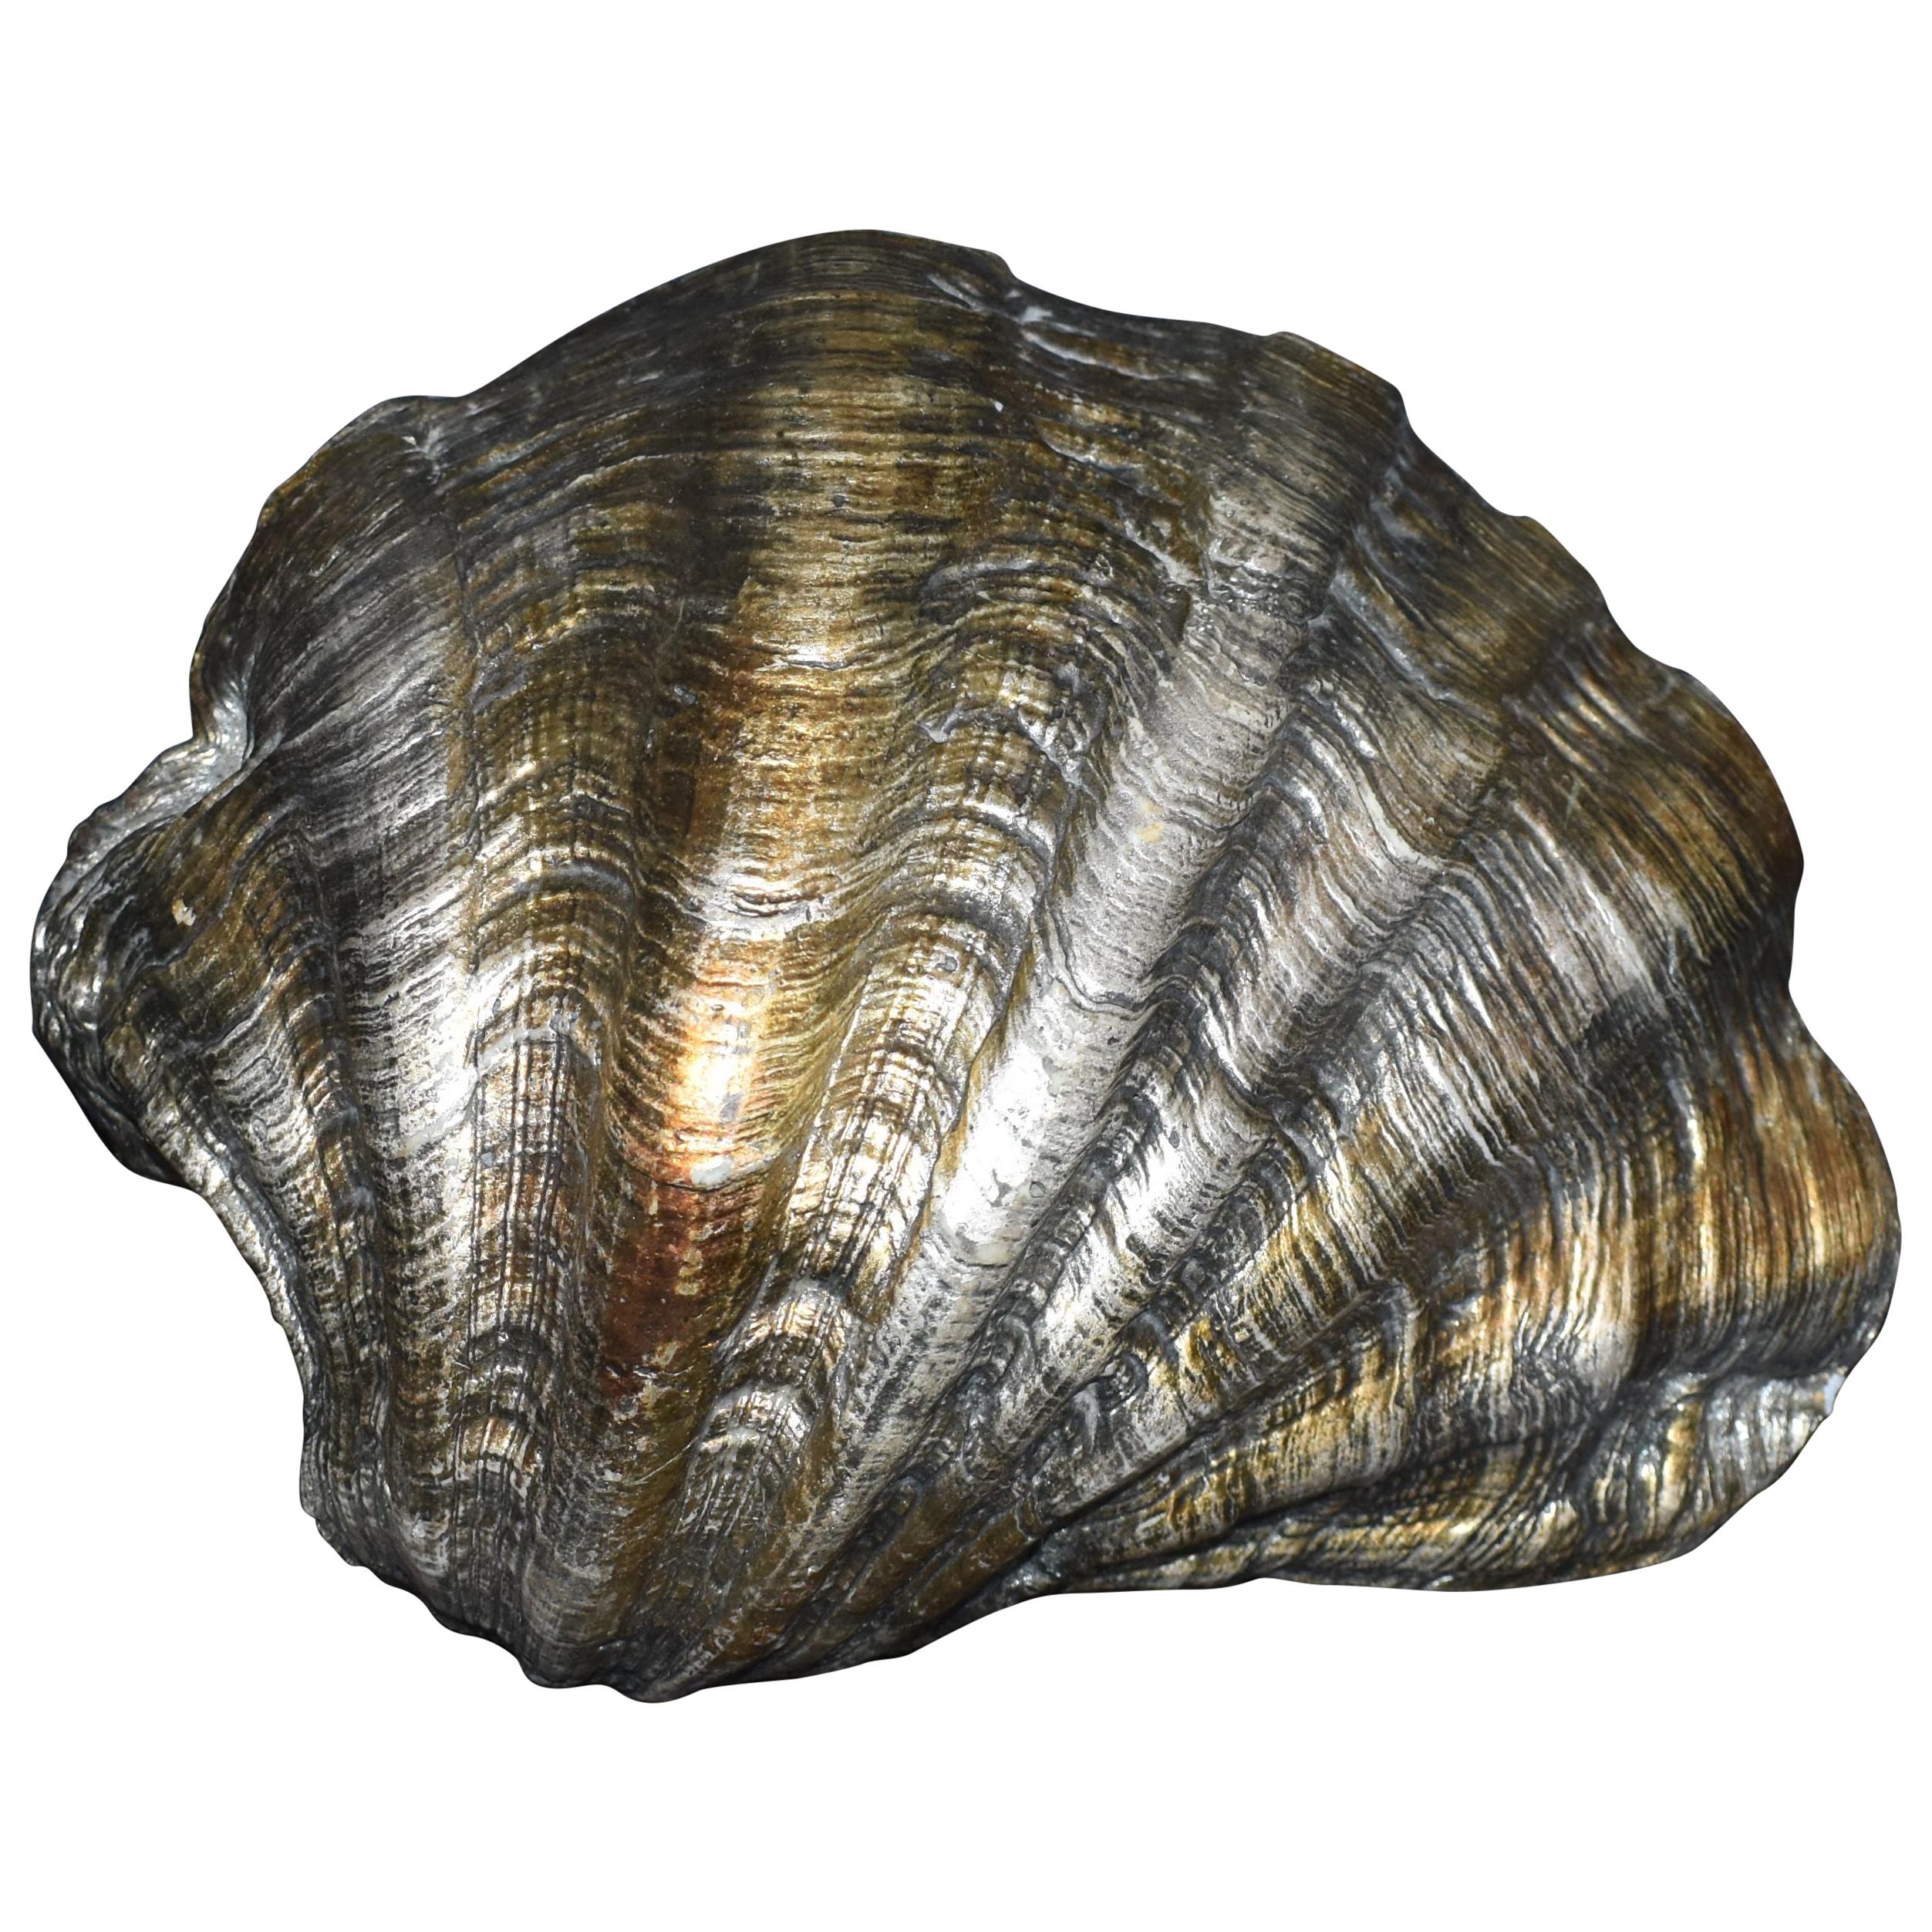 A Silver Leaf Natural Sea Shell (coquillage naturel)